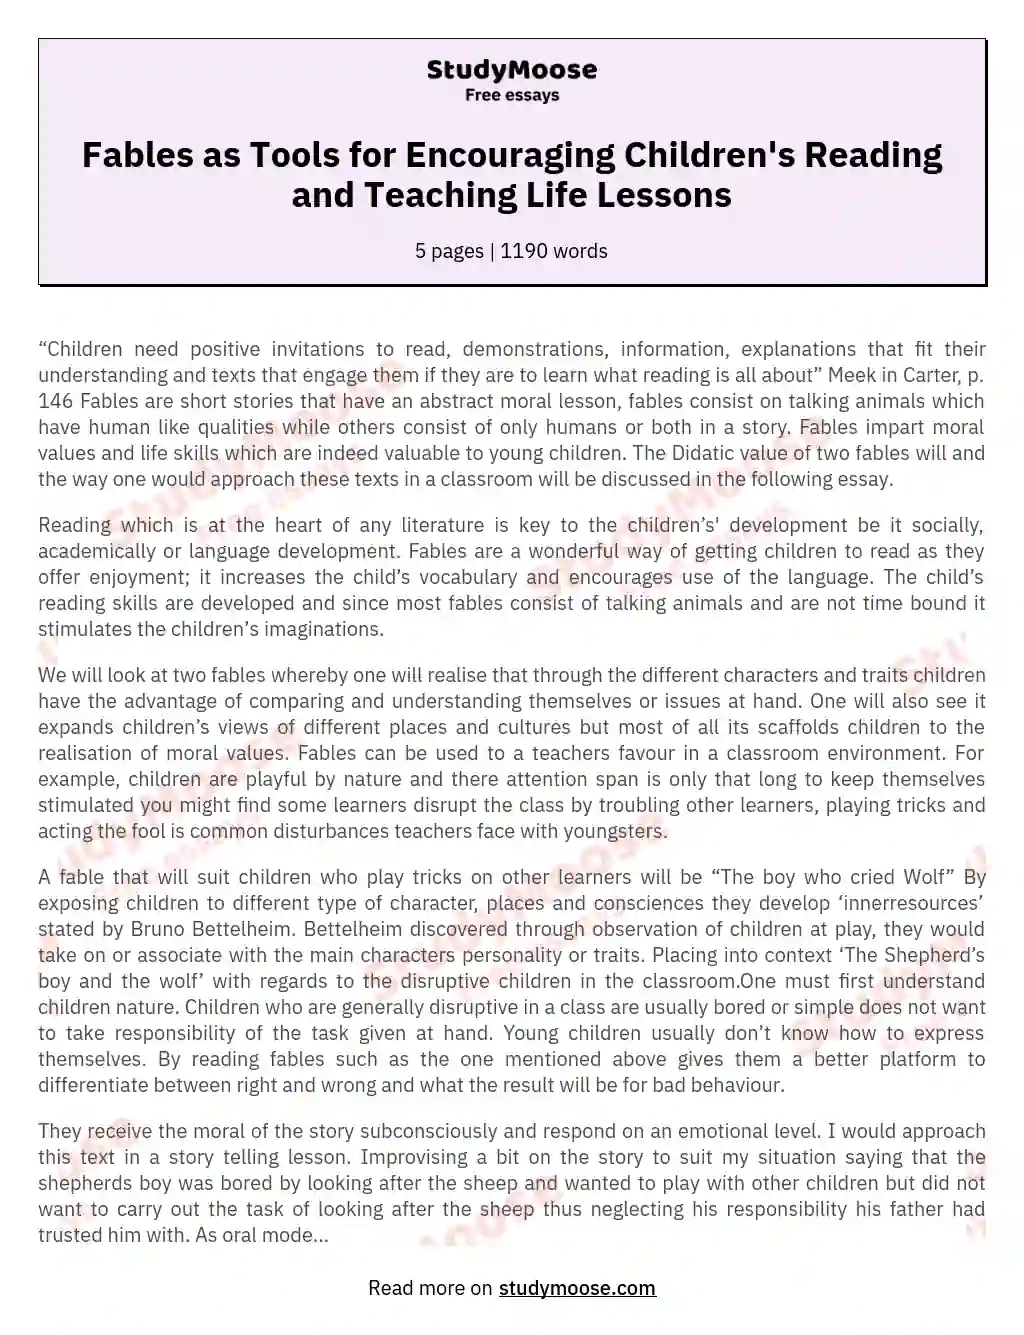 Fables as Tools for Encouraging Children's Reading and Teaching Life Lessons essay